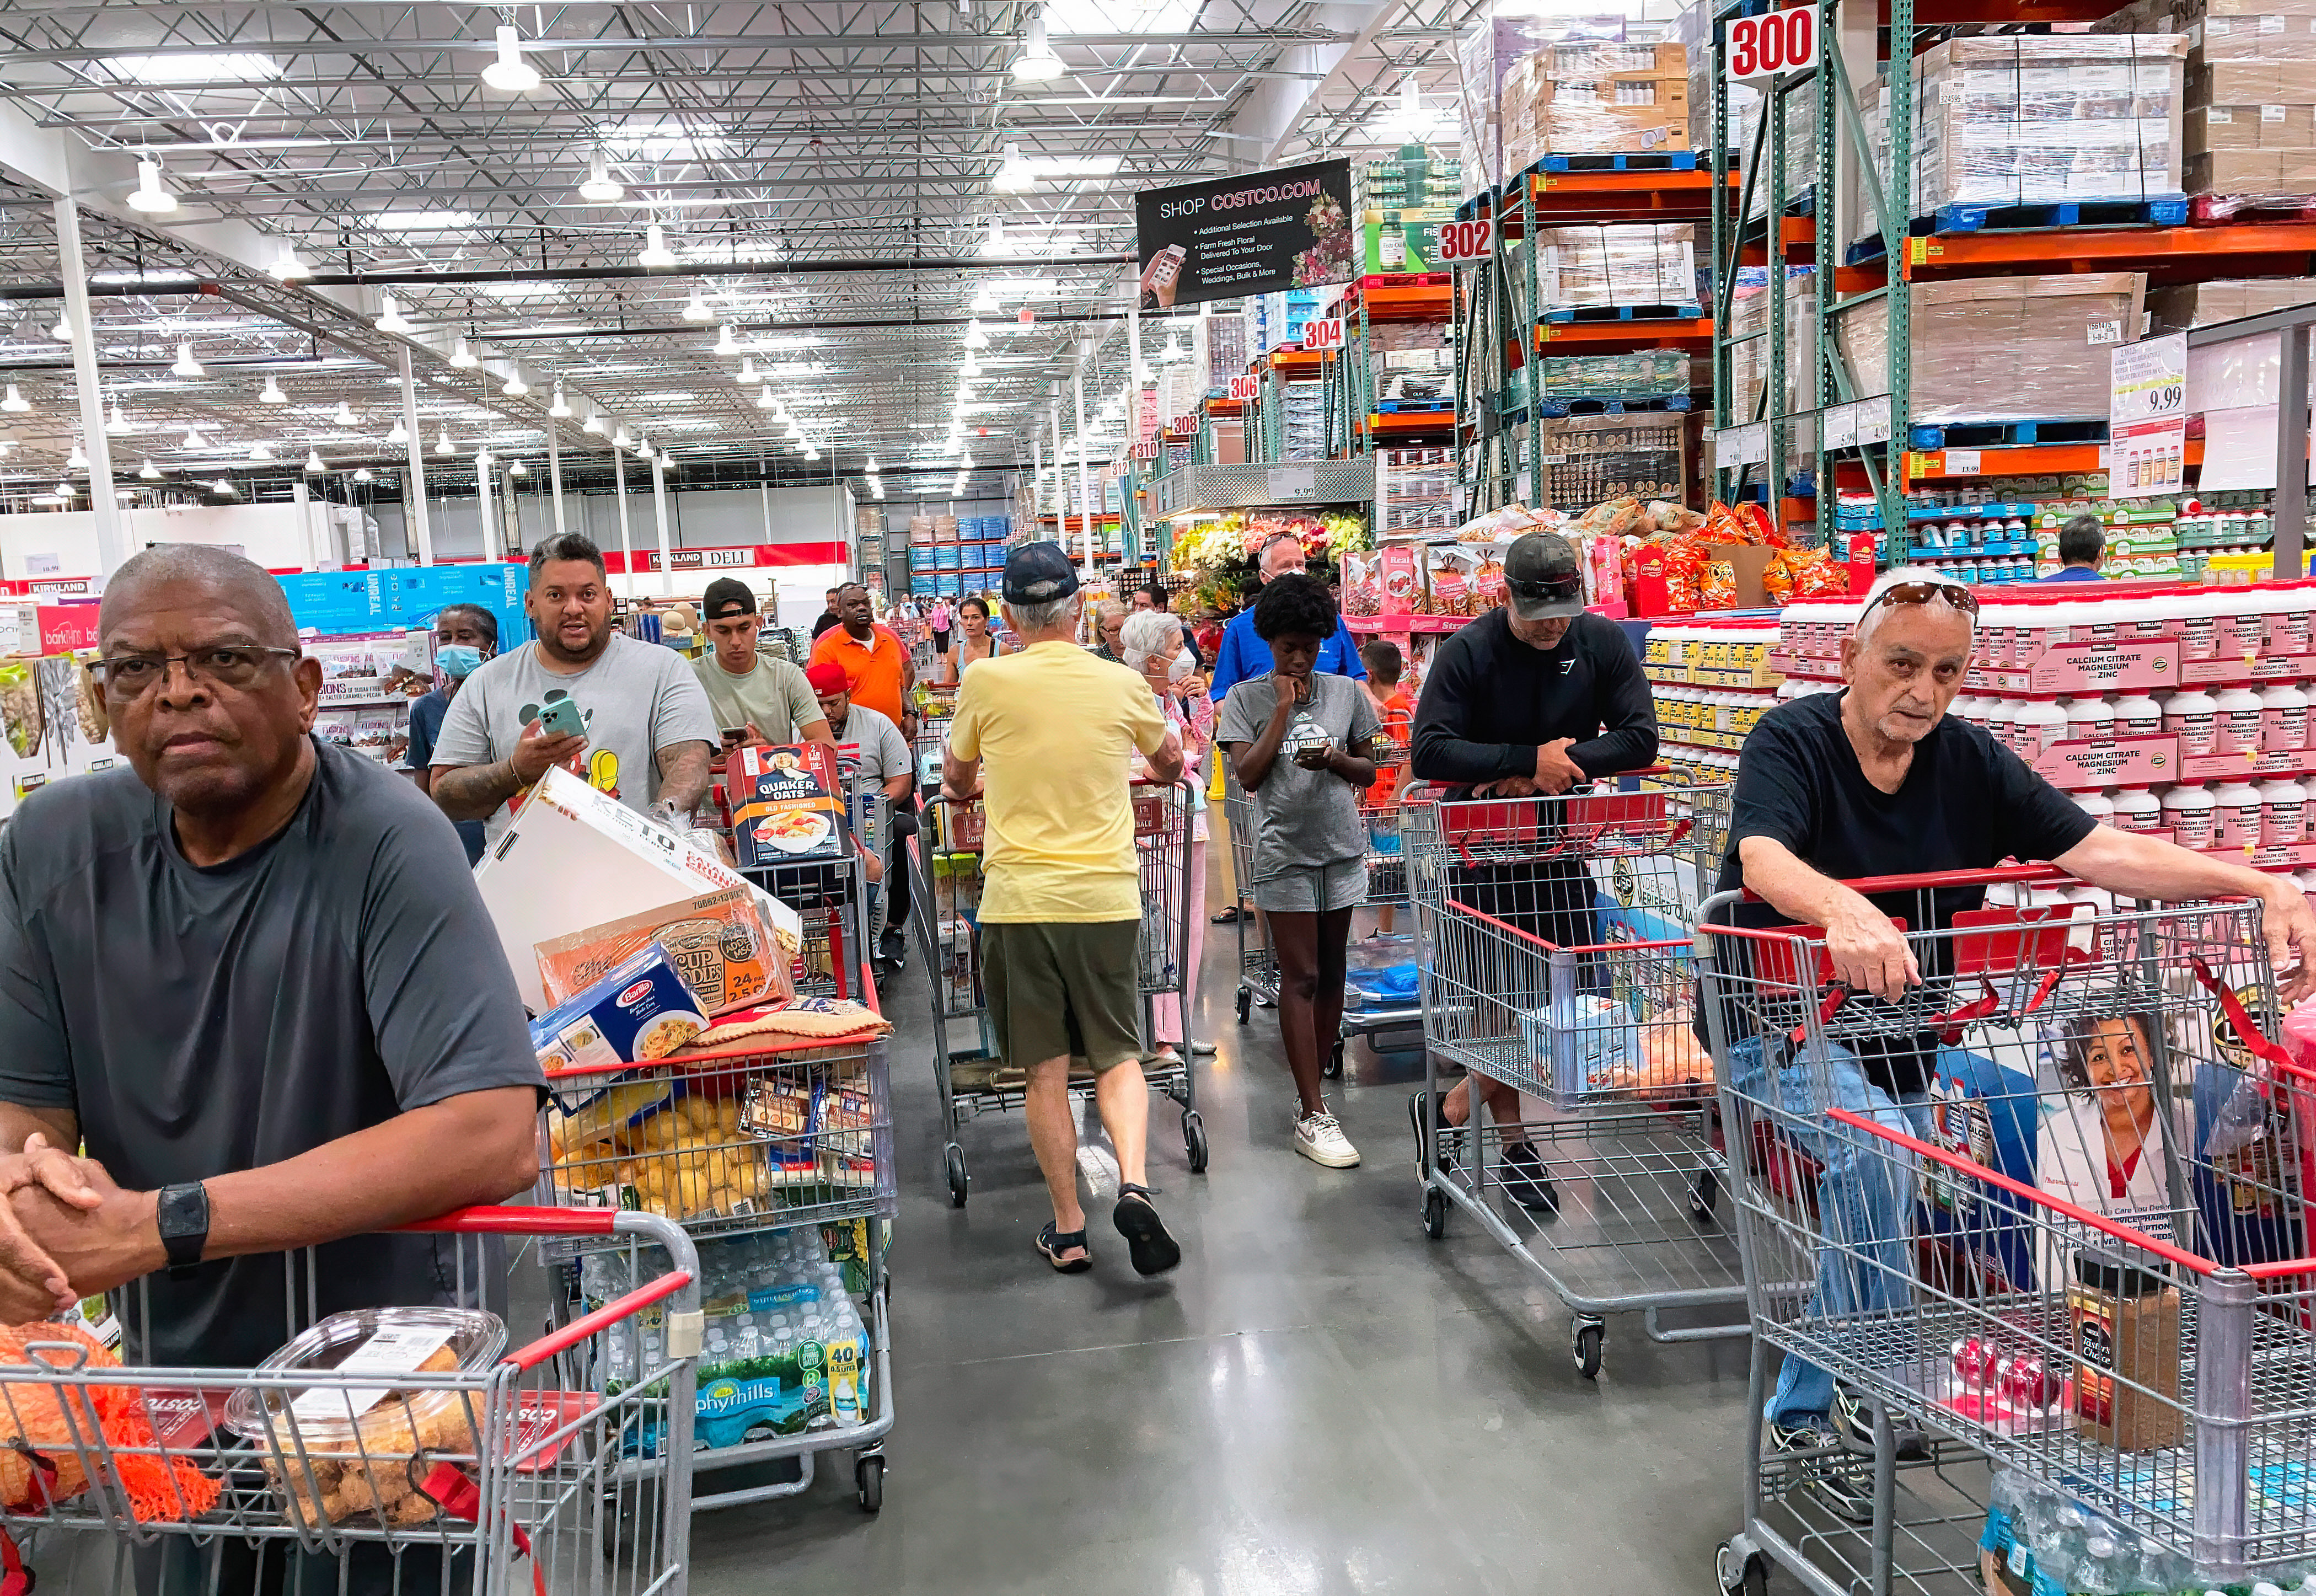 ORLANDO, FLORIDA, UNITED STATES - 2022/05/31: Shoppers wait in a check-out line at a Costco wholesale store in Orlando. (Paul Hennessy—SOPA Images/LightRocket via Getty Images)